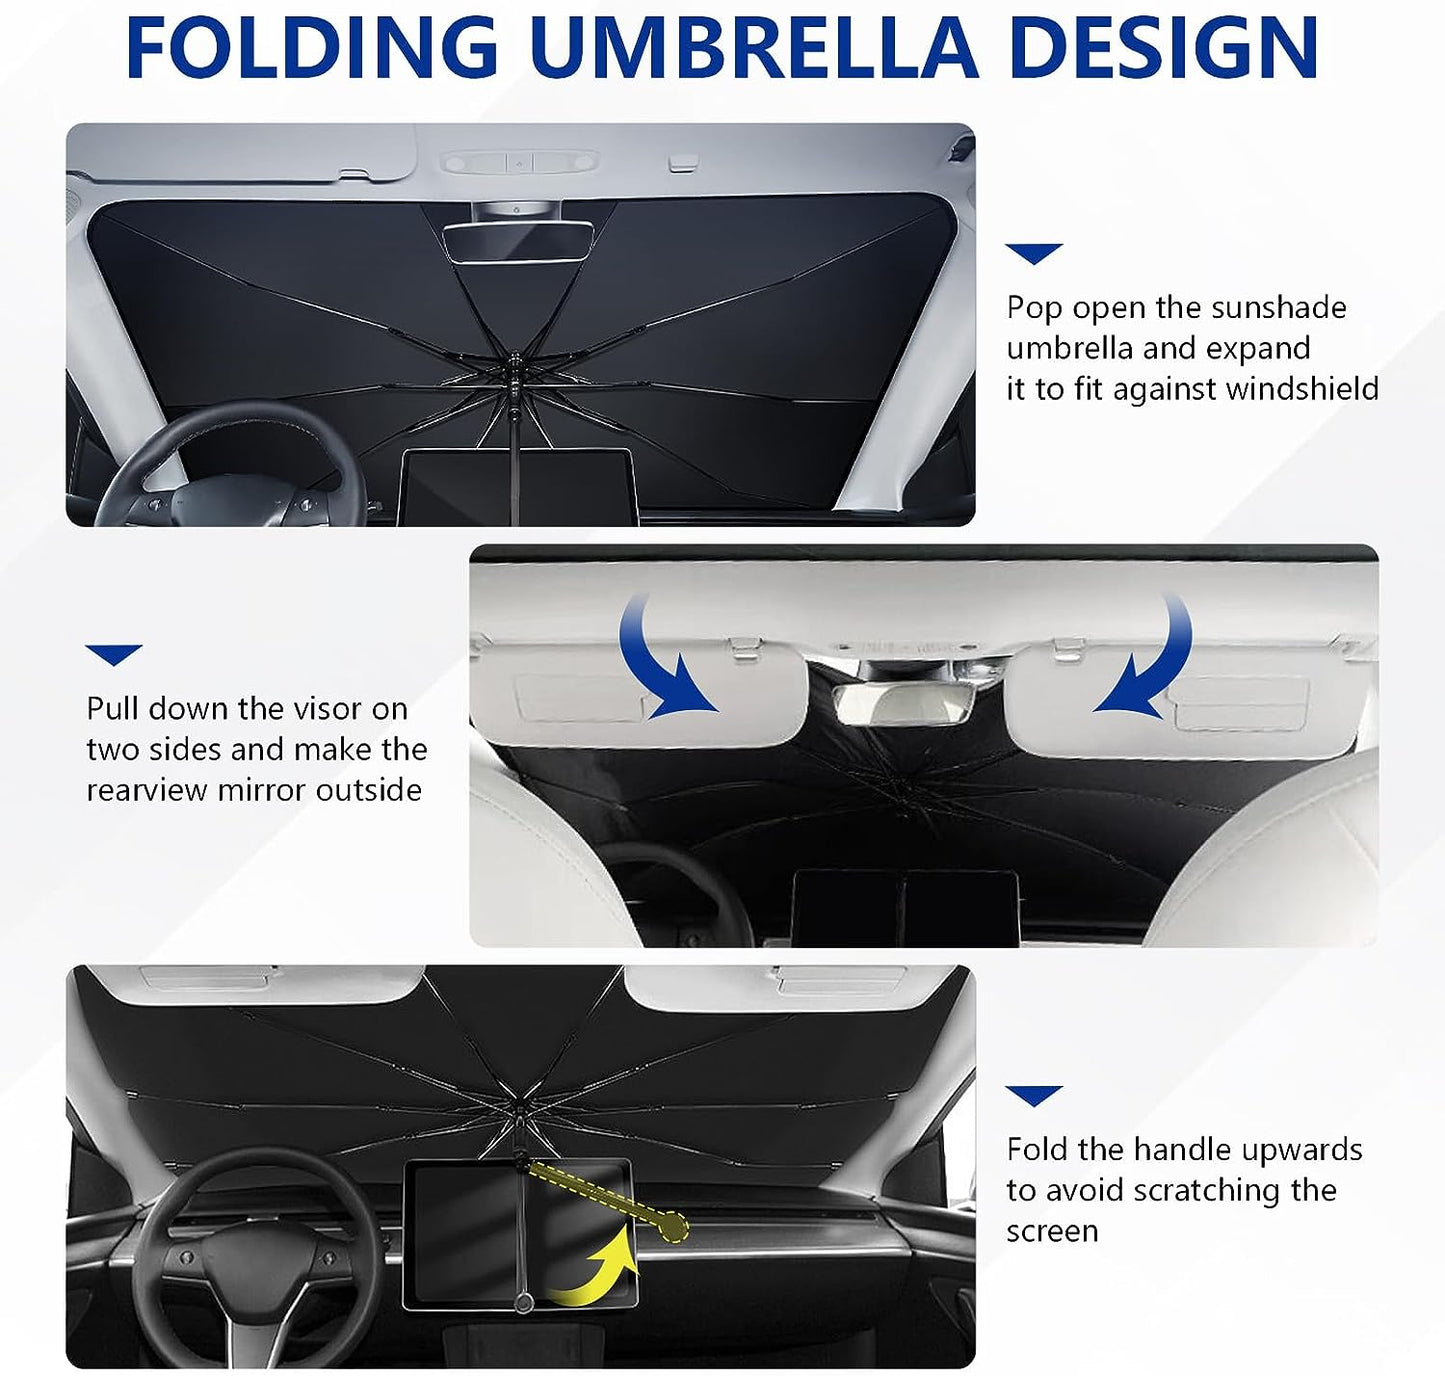 Car Windshield Sun Shade - Foldable Umbrella Reflective Sunshade for Car Front Window Block UV Rays and Heat Car Visor Keep Vehicle Cool Cover Most Cars, SUV, Truck for Auto Windshield